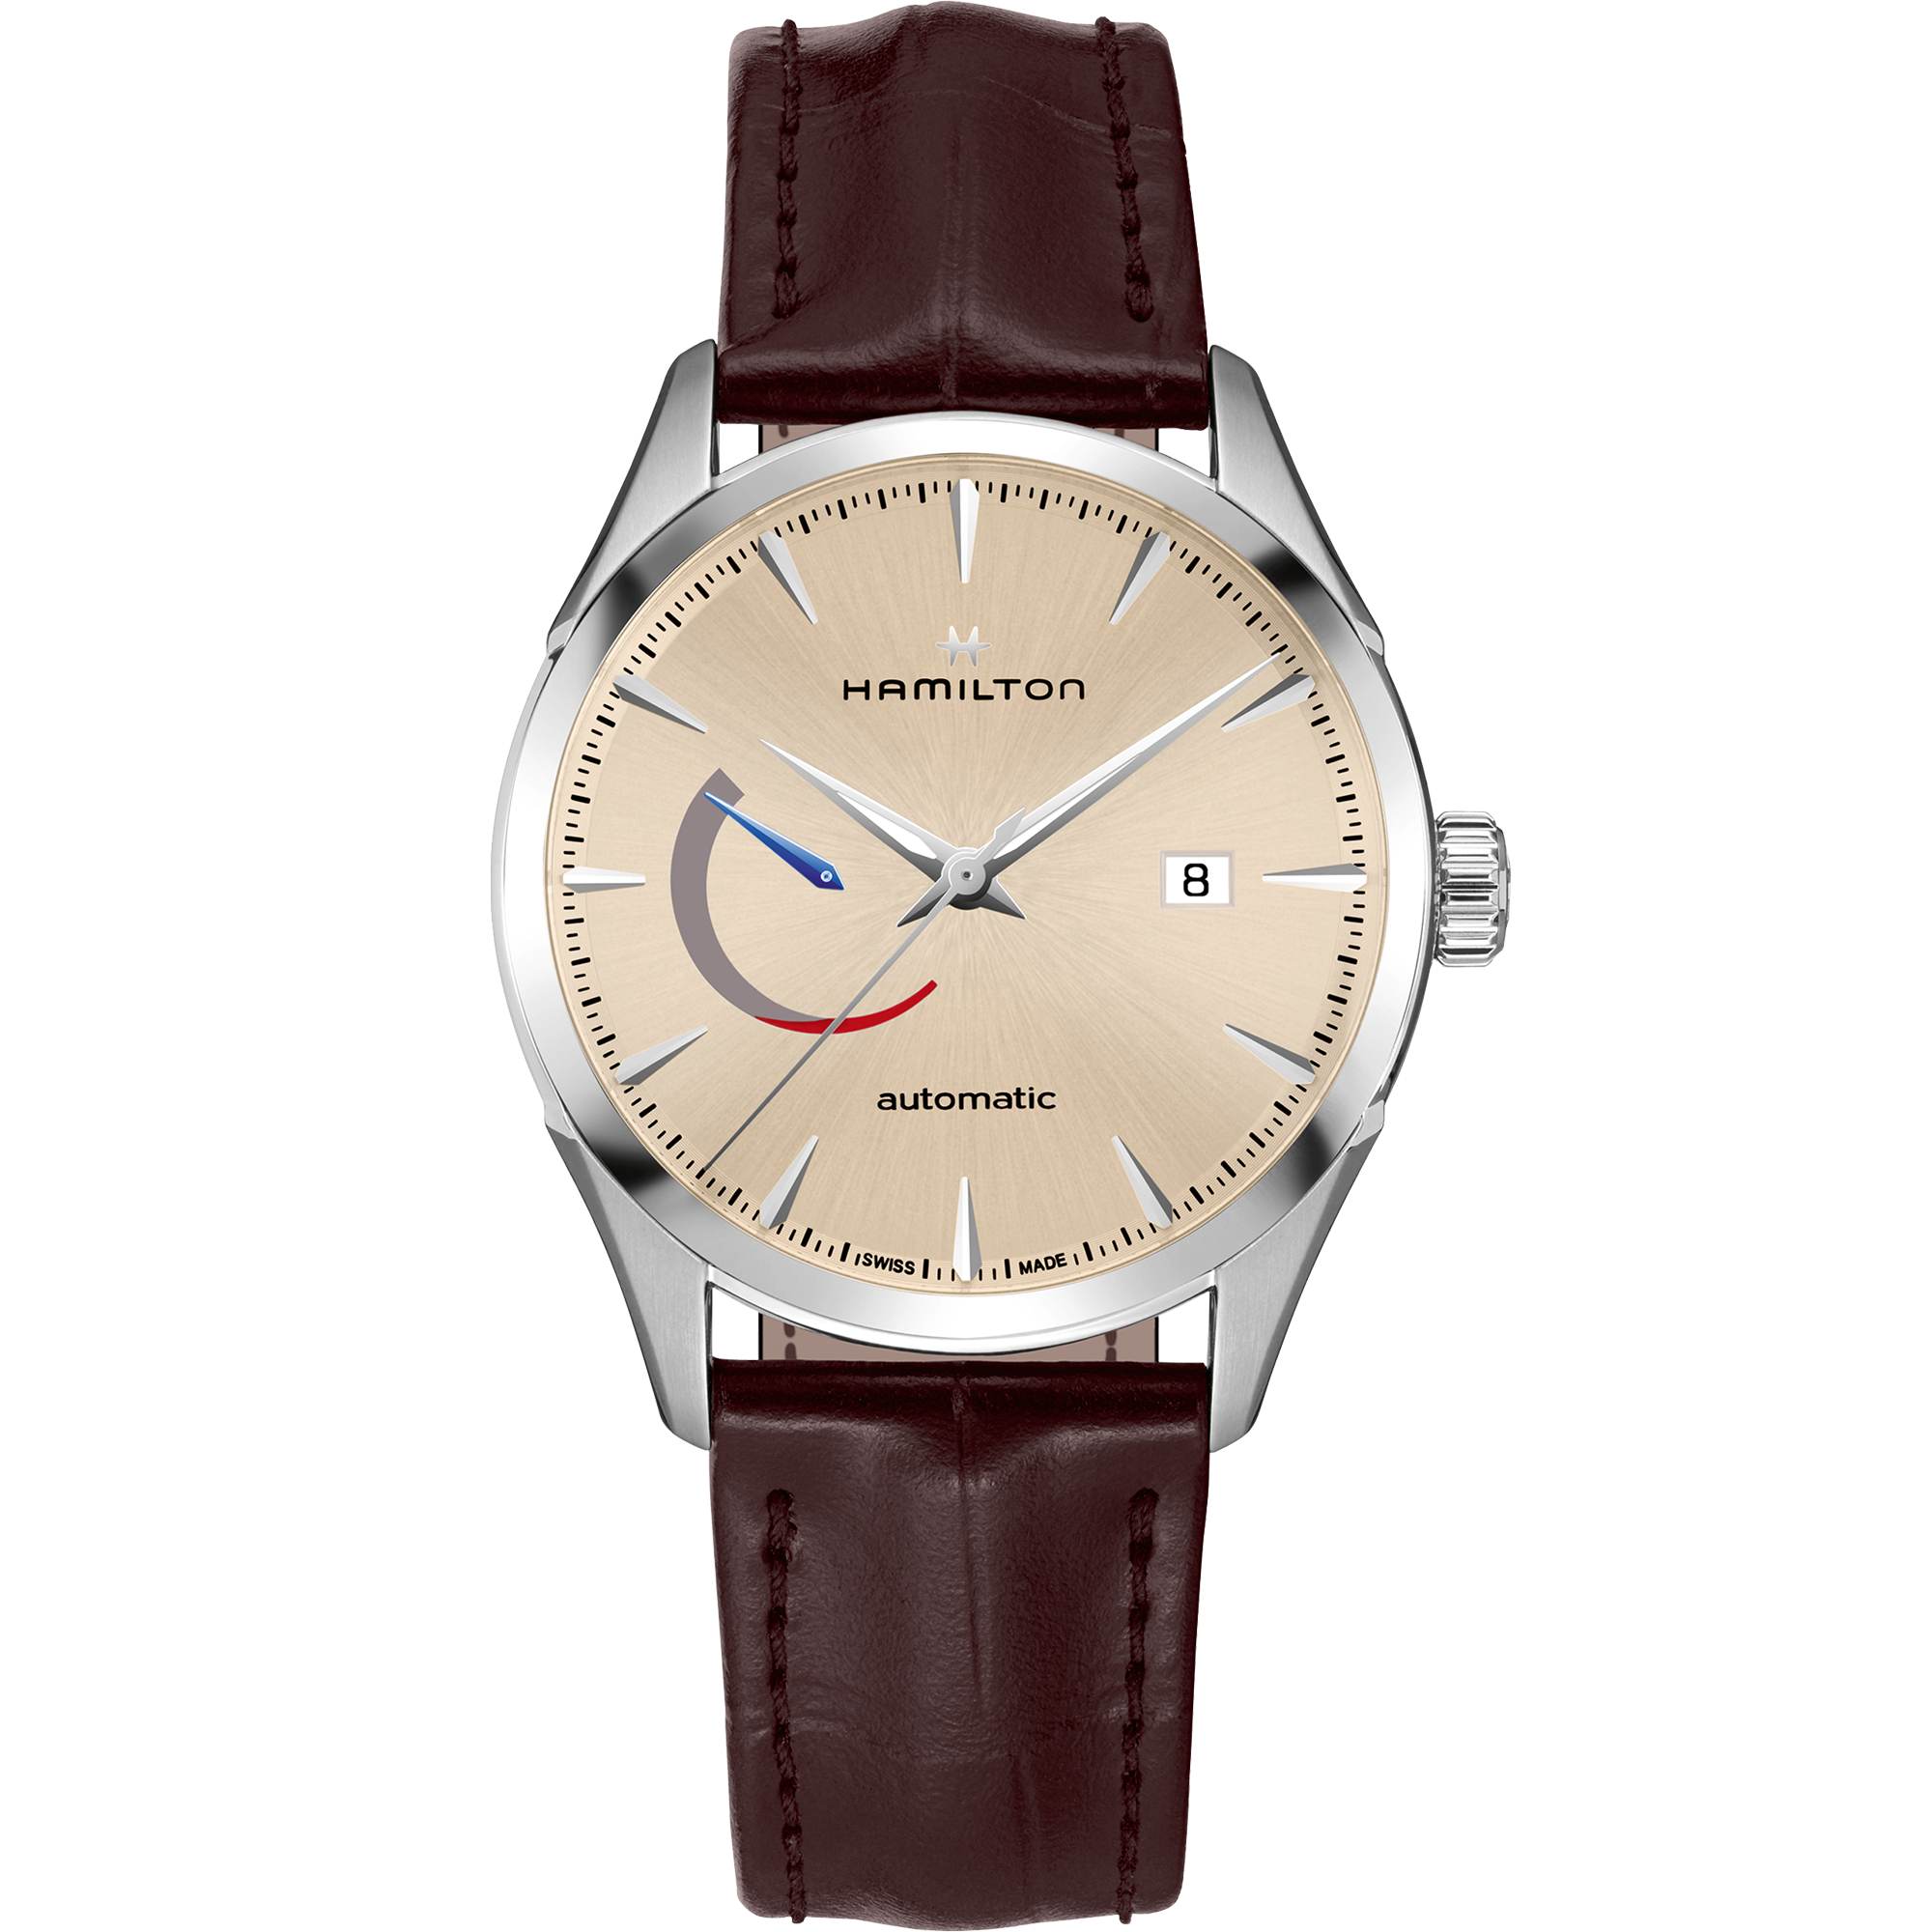 Jazzmaster Automatic Watch Power Reserve - Beige Dial - H32635521